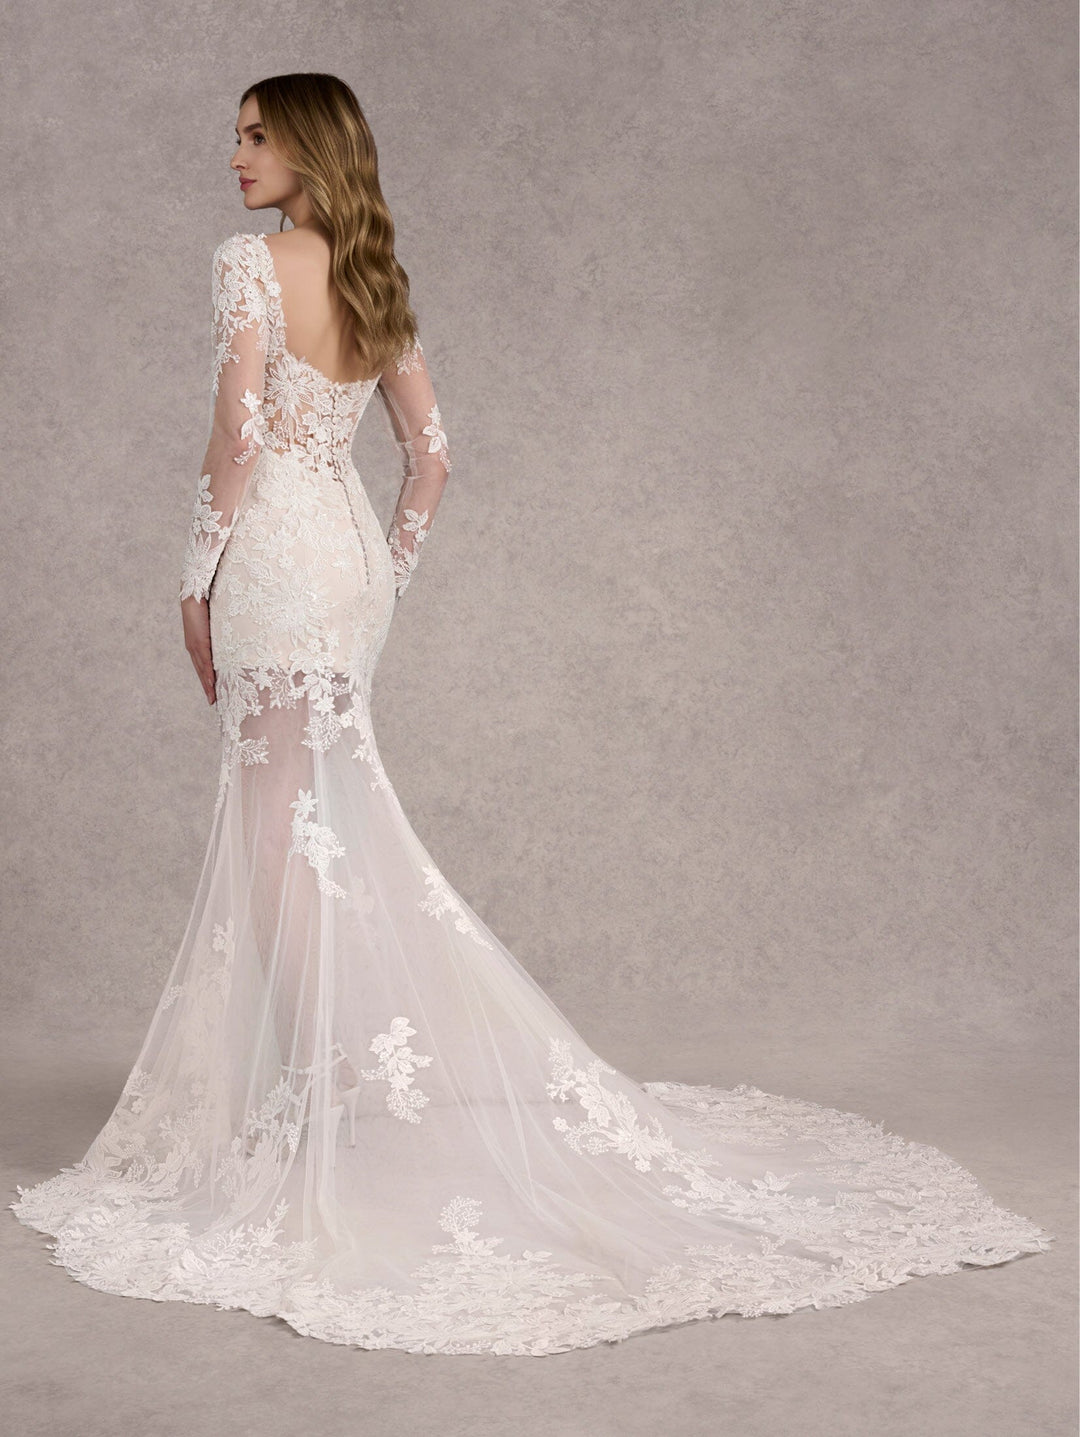 Applique Sheer Skirt Wedding Gown by Adrianna Papell 31262